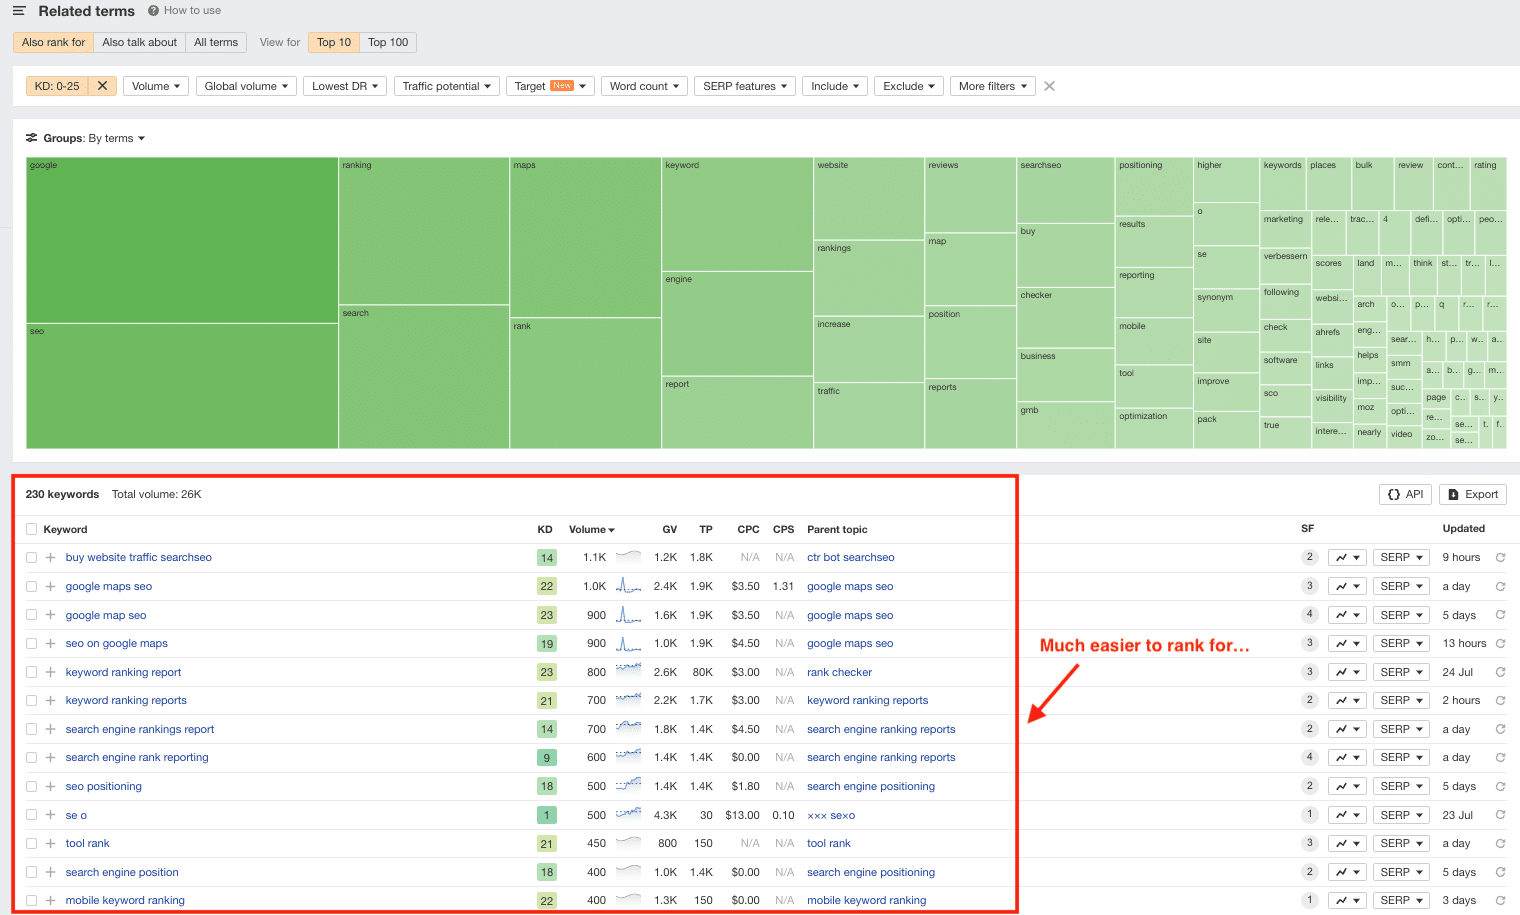 Here is the step 2 of finding PASF keywords with Ahrefs.